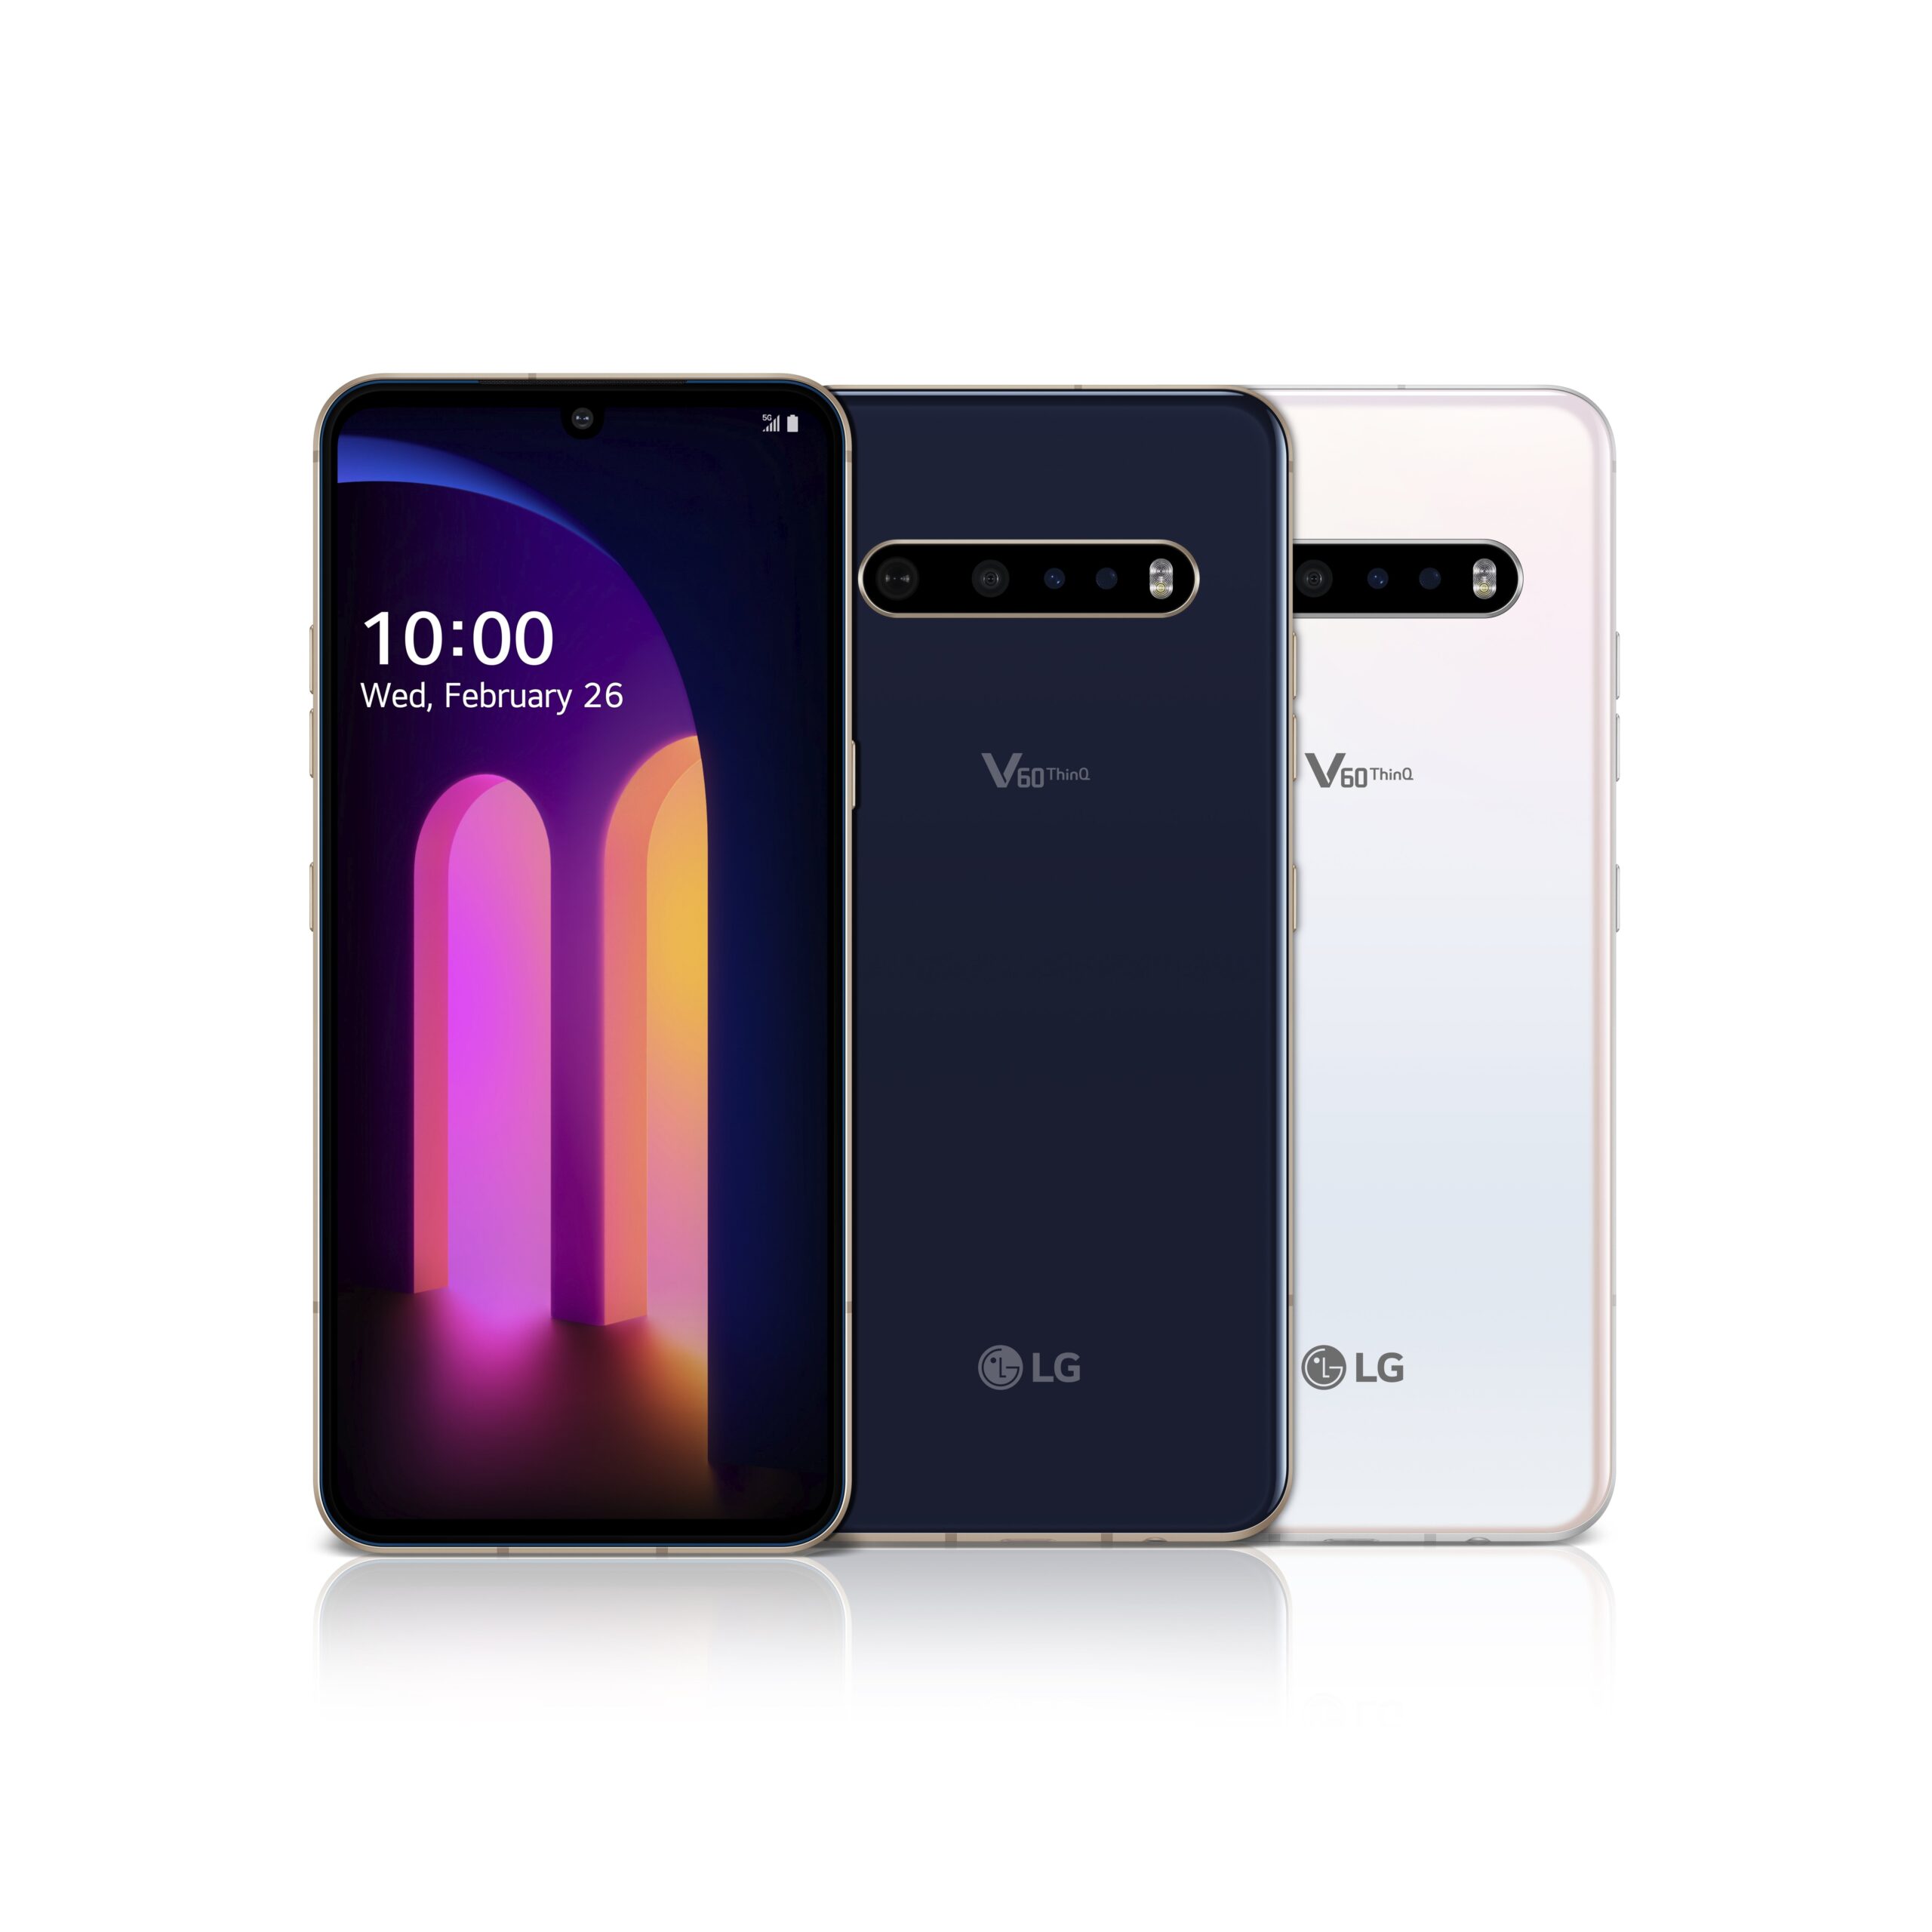 The front and rear view of the LG V60 ThinQ 5G in Classy Blue and Classy White